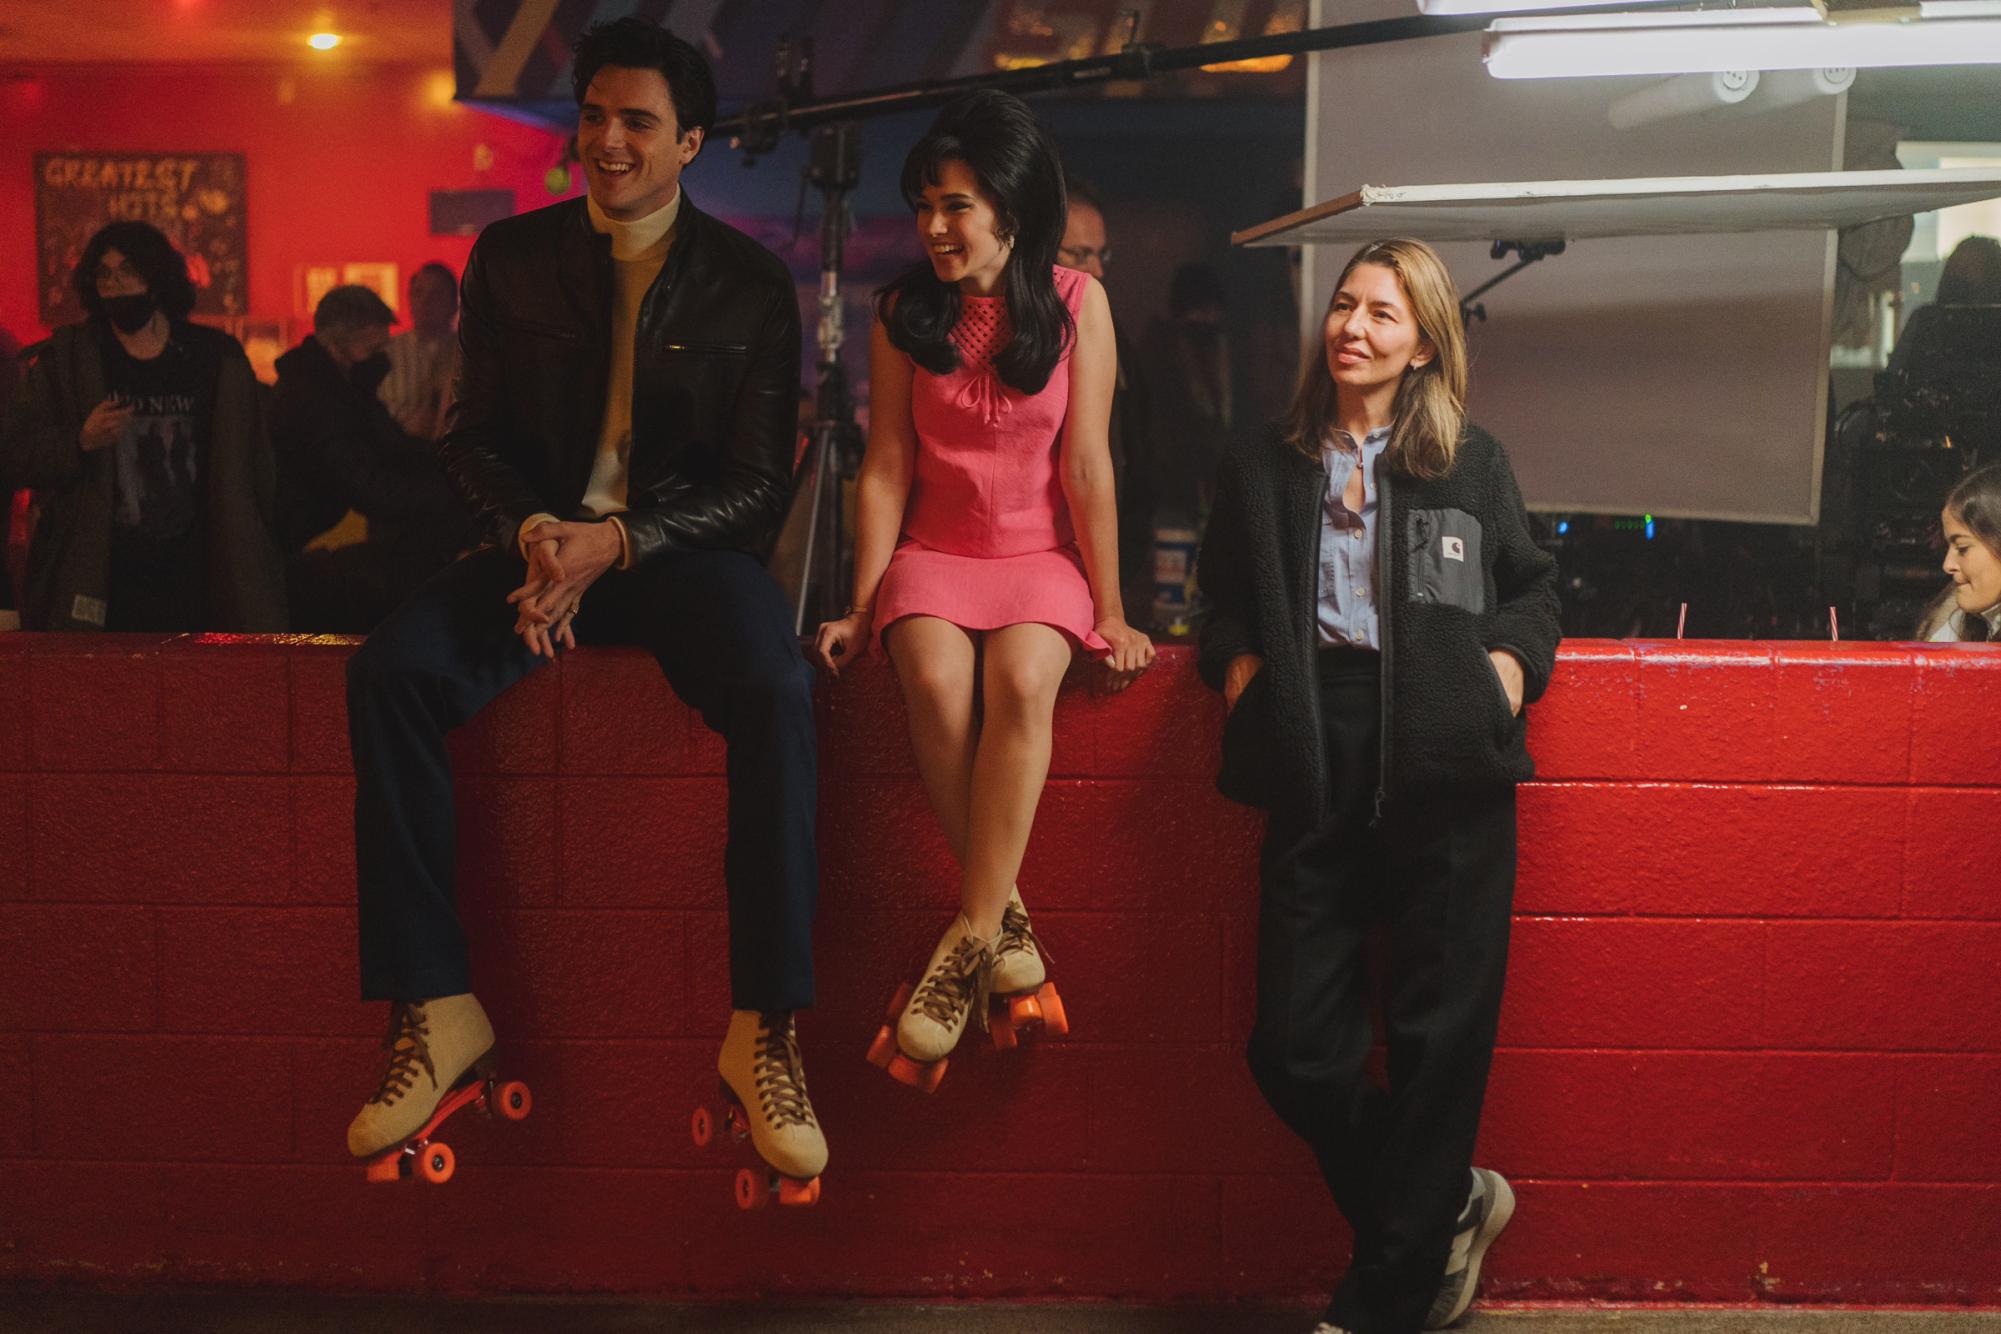 Jacob Elordi and Cailee Spaeny as their characters in “Priscilla” sit on a red wall wearing roller skates. Sofia Coppola stands next to them leaning against the wall.